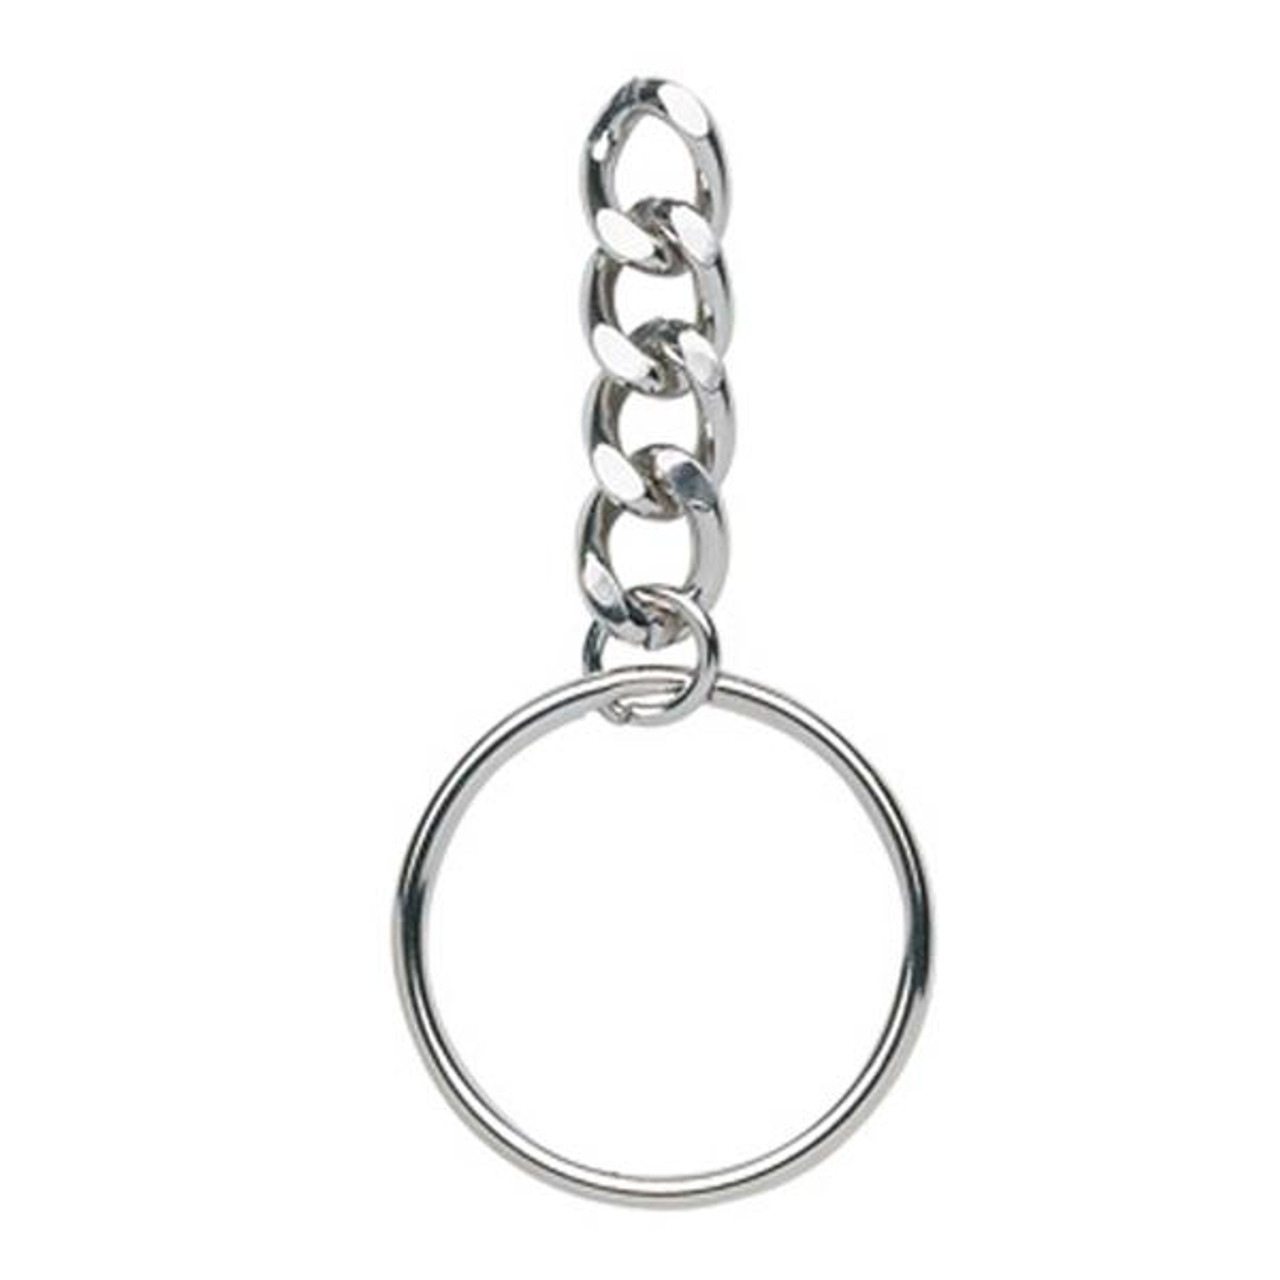 10pcs Key Chain Rings, Rhodium Plated, Starter Chain Base, Split Ring25mm  With 30mm Chain 